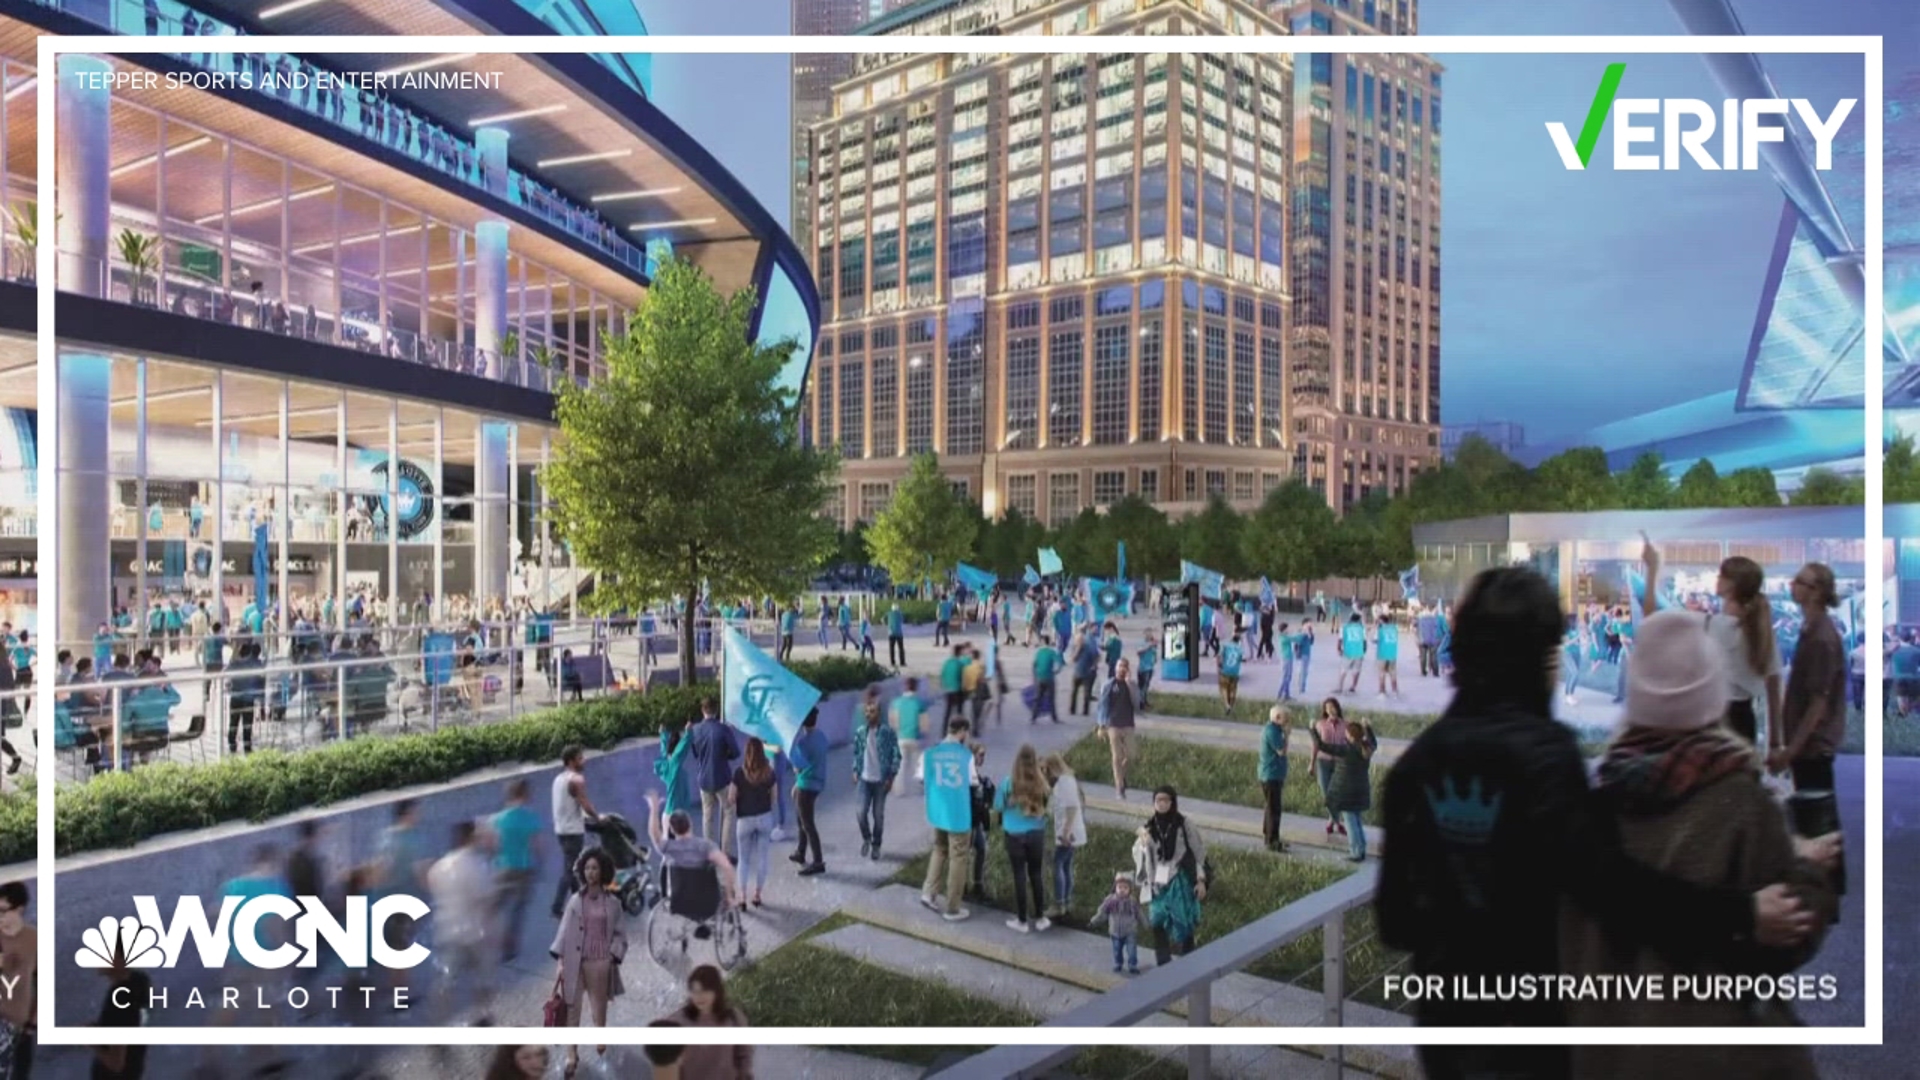 It's been just days since we got our first look at renovation plans for Bank of America Stadium. Meghan Bragg takes a look at how such renovations get funded.